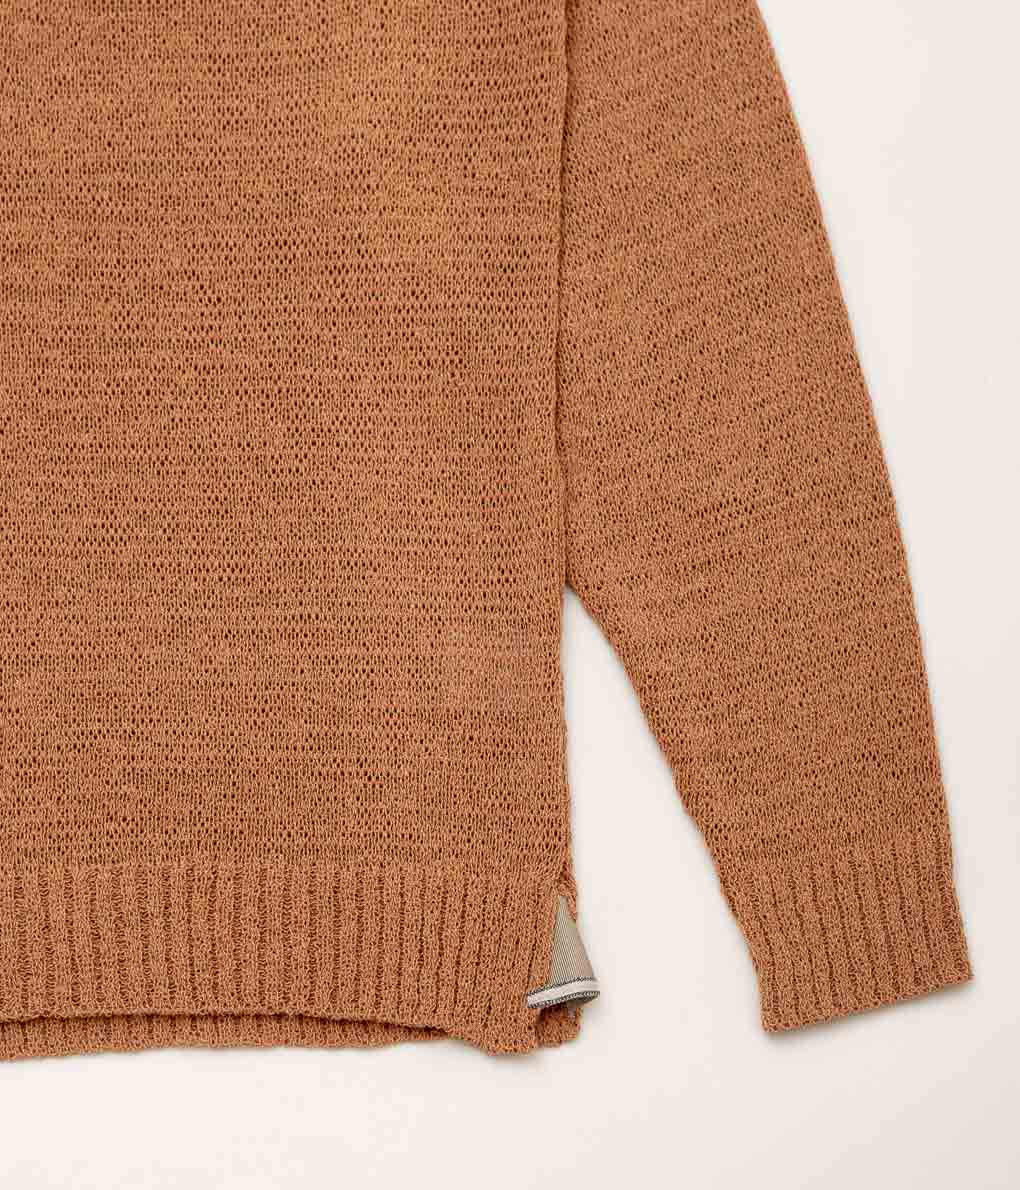 ANSNAM''TAPE YARN KNIT POLO''(BROWN)